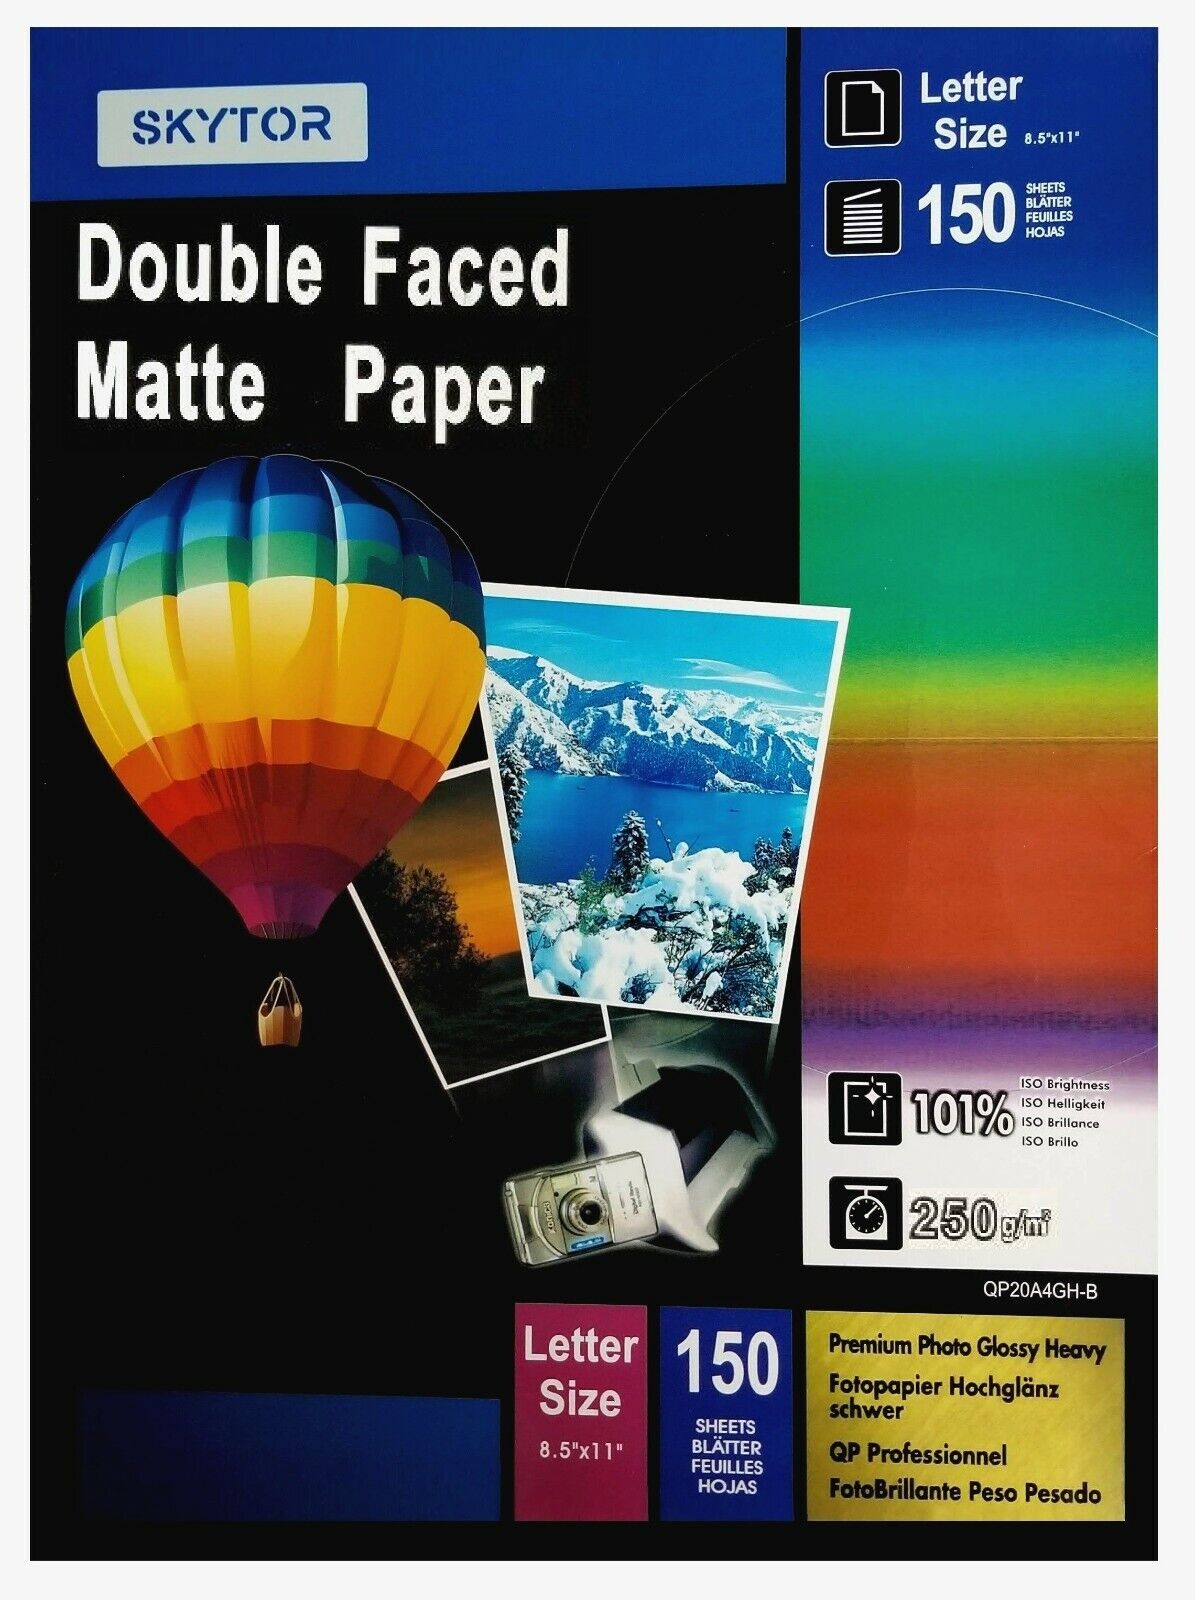 150 Sheets Inkjet Photo Paper Double Sided Matte 8.5x11 Letter 250gsm / 67lbs